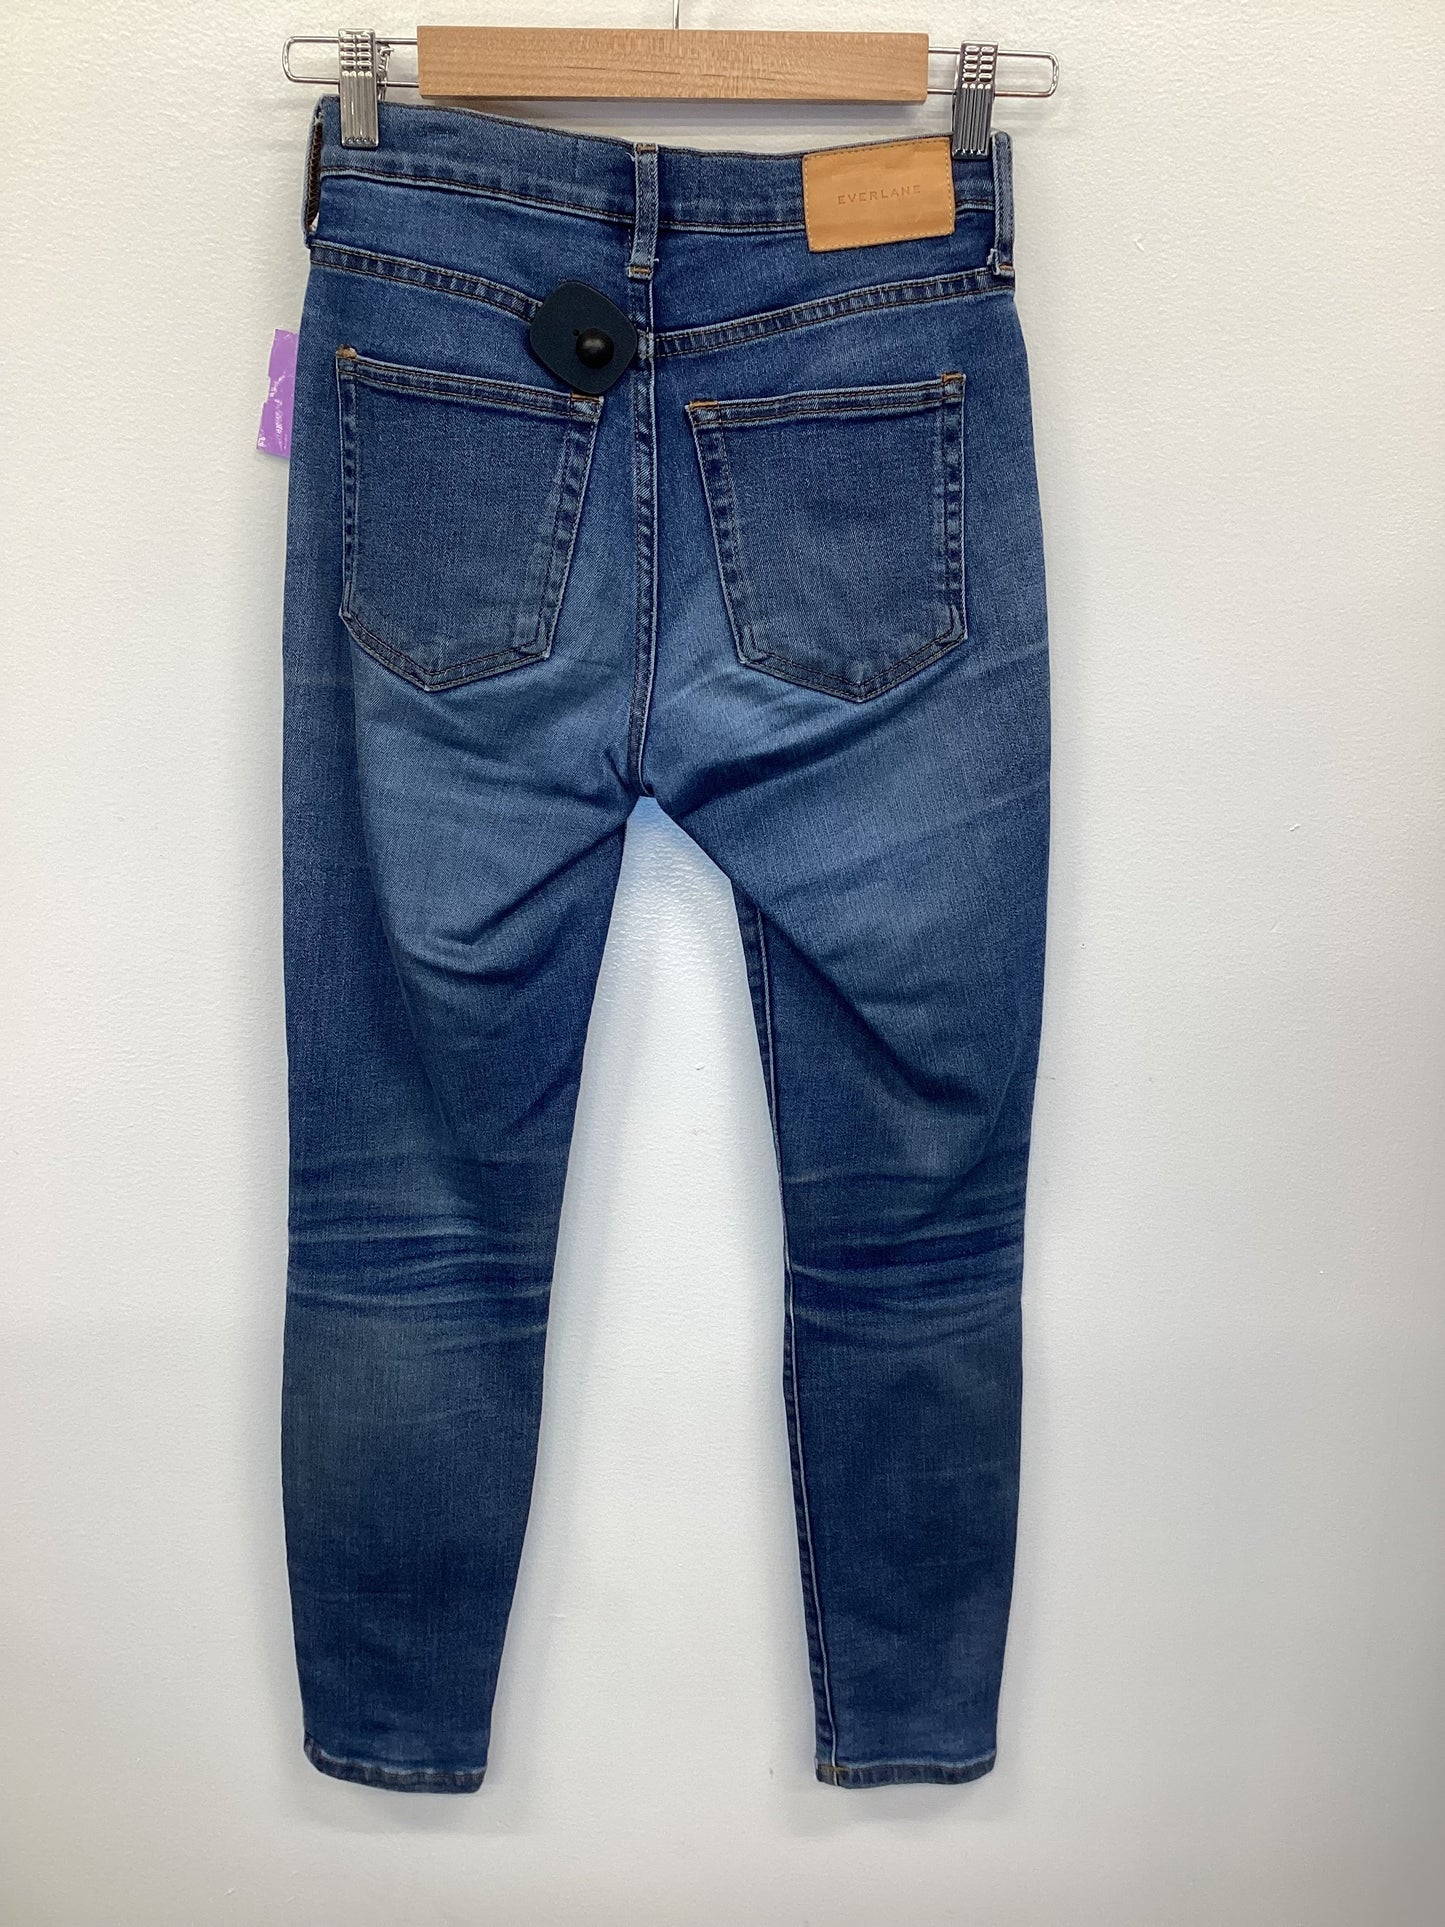 Jeans Skinny By Everlane  Size: 24